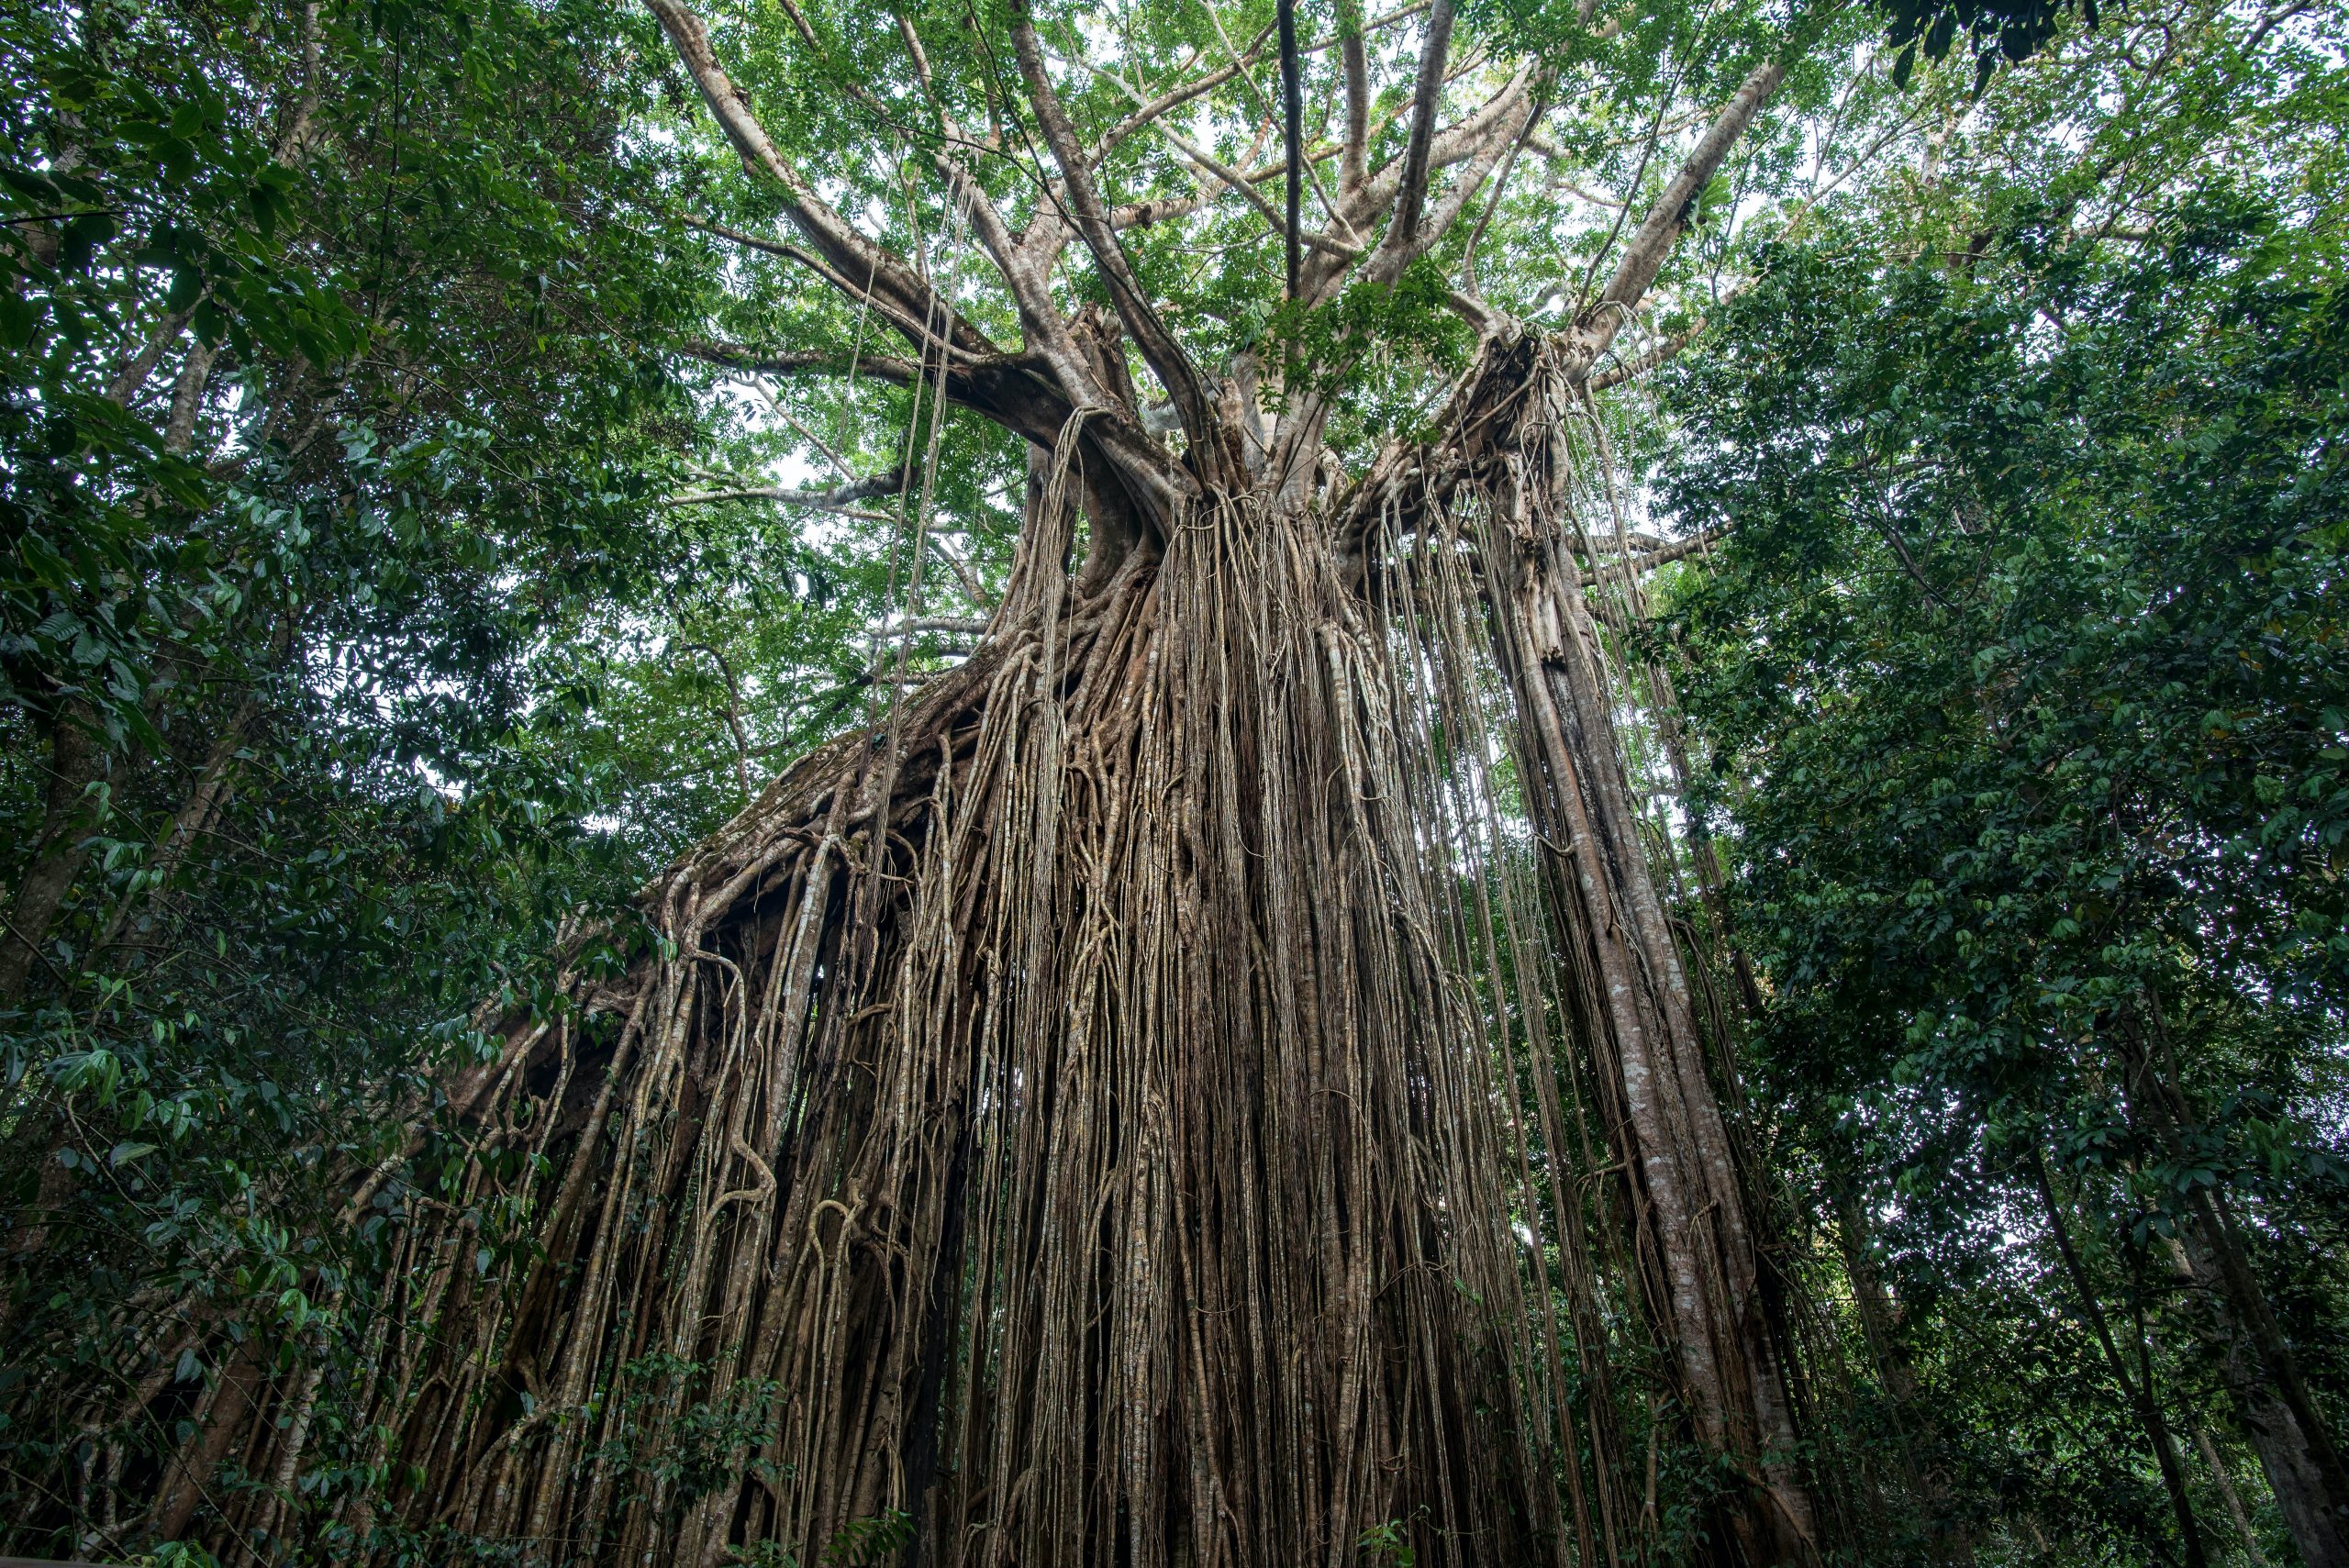 Curtain Fig Tree in the Tablelands, Queensland, Australia